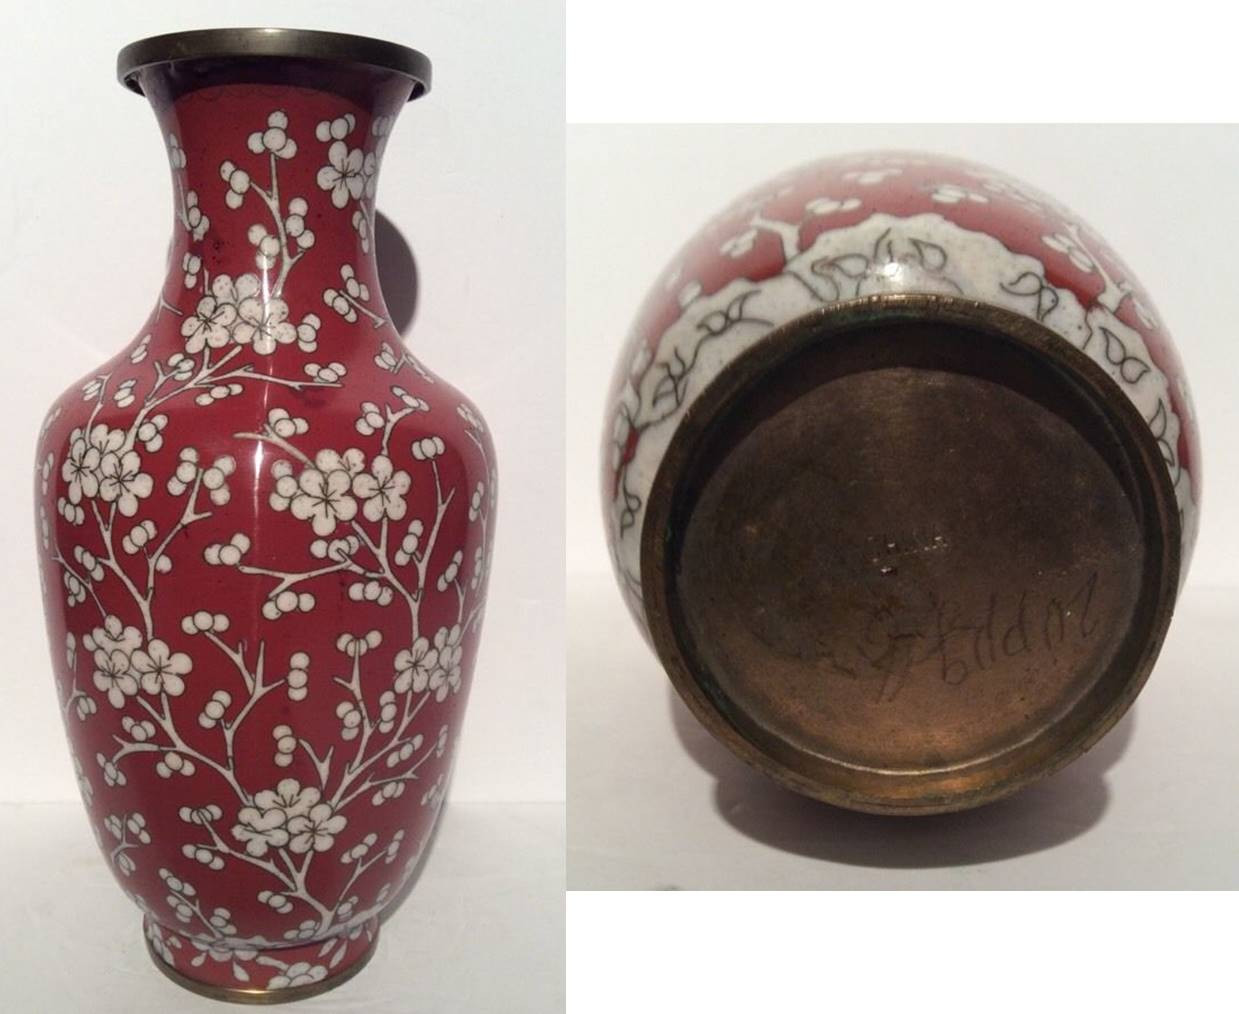 30 Wonderful Japanese Cloisonne Vase 2024 free download japanese cloisonne vase of beadiste 2015 for the bamboo shoots pattern around the base seems to appear often in pieces from the 1920s 30s